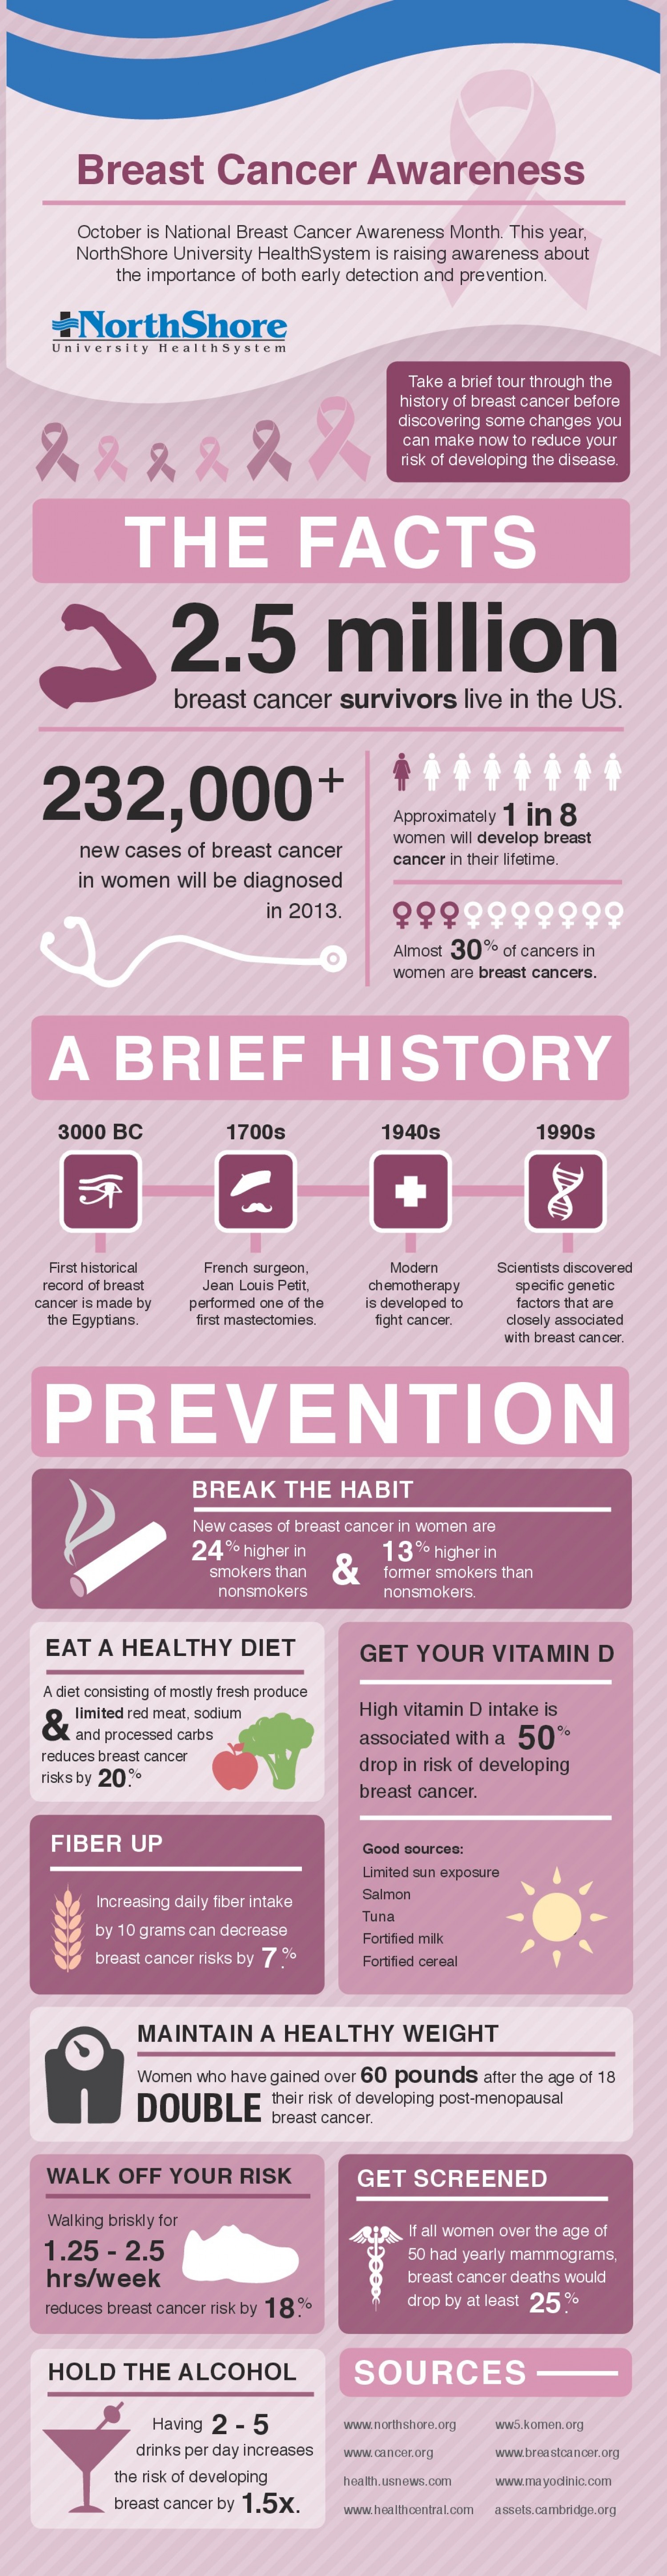 10. History, Risk Factors, and Prevention